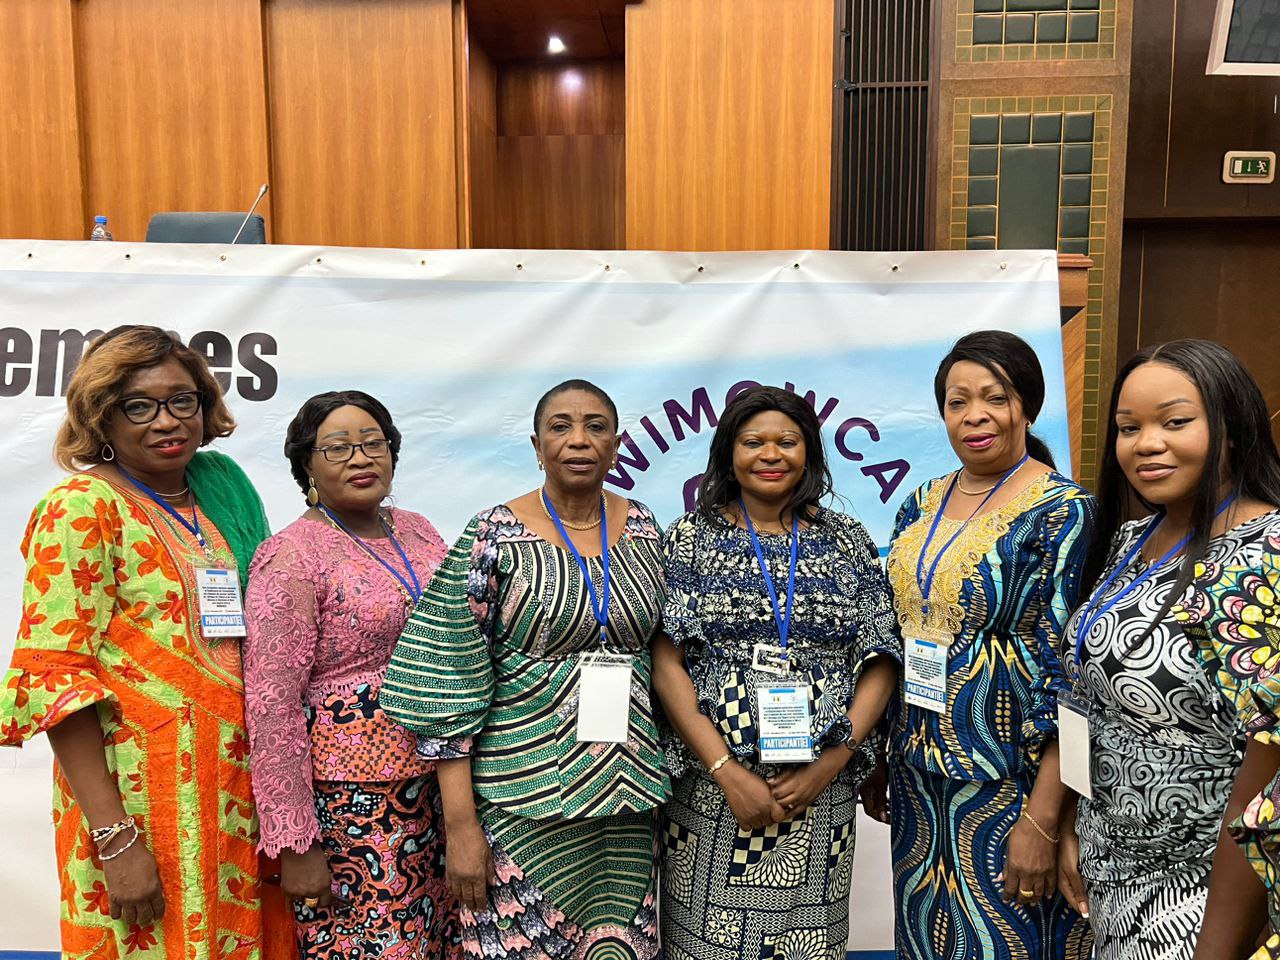 The women of WIMOWCA DRC, strongly represented at the first Annual General Assembly and Conference of the Association in Dakar